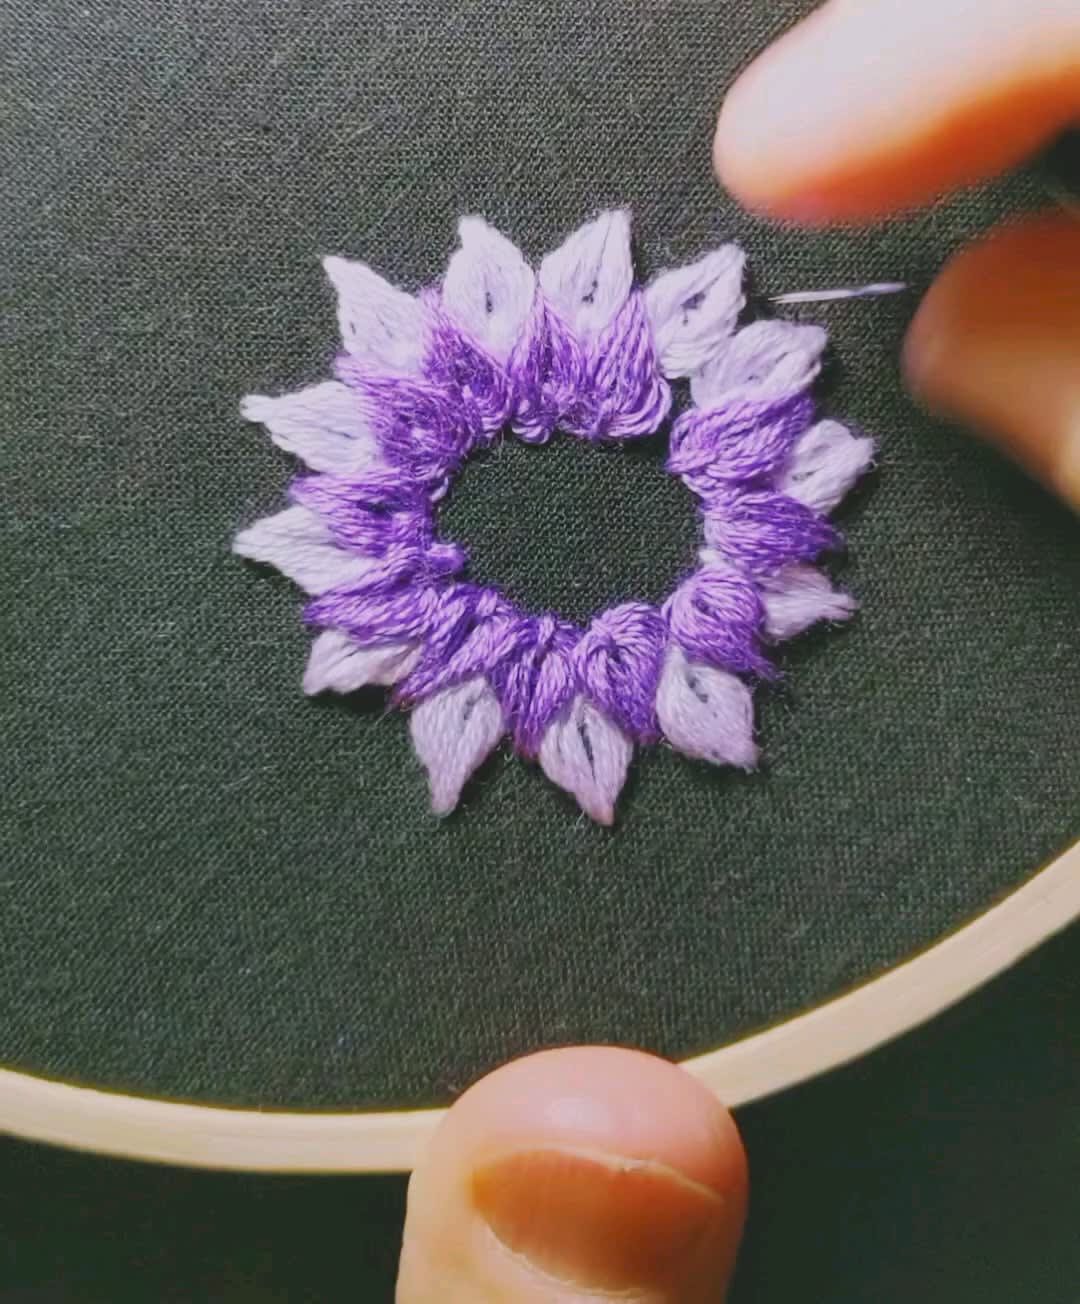 Embroidery timelapse!